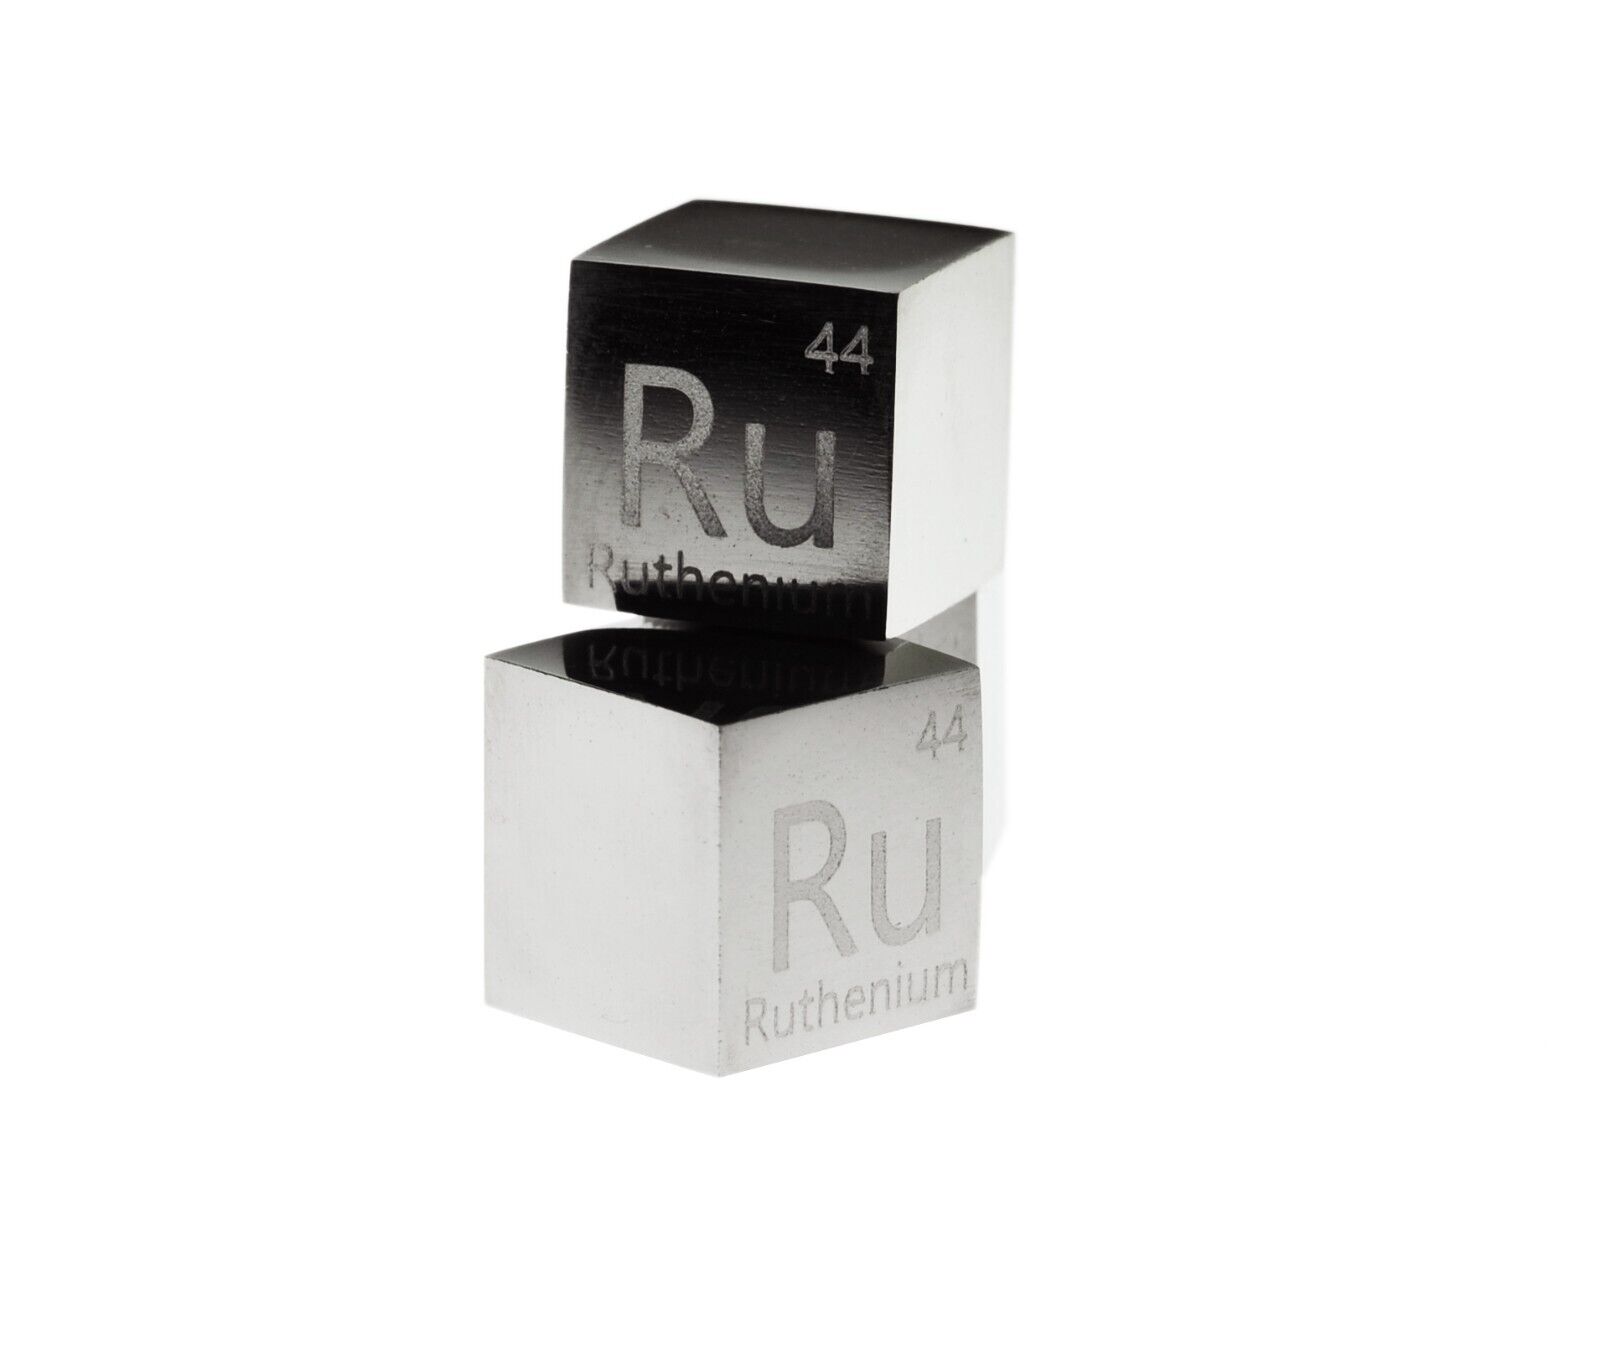 Ruthenium Metal 10mm Density Cube 99.95% for Element Collection USA SHIPPING